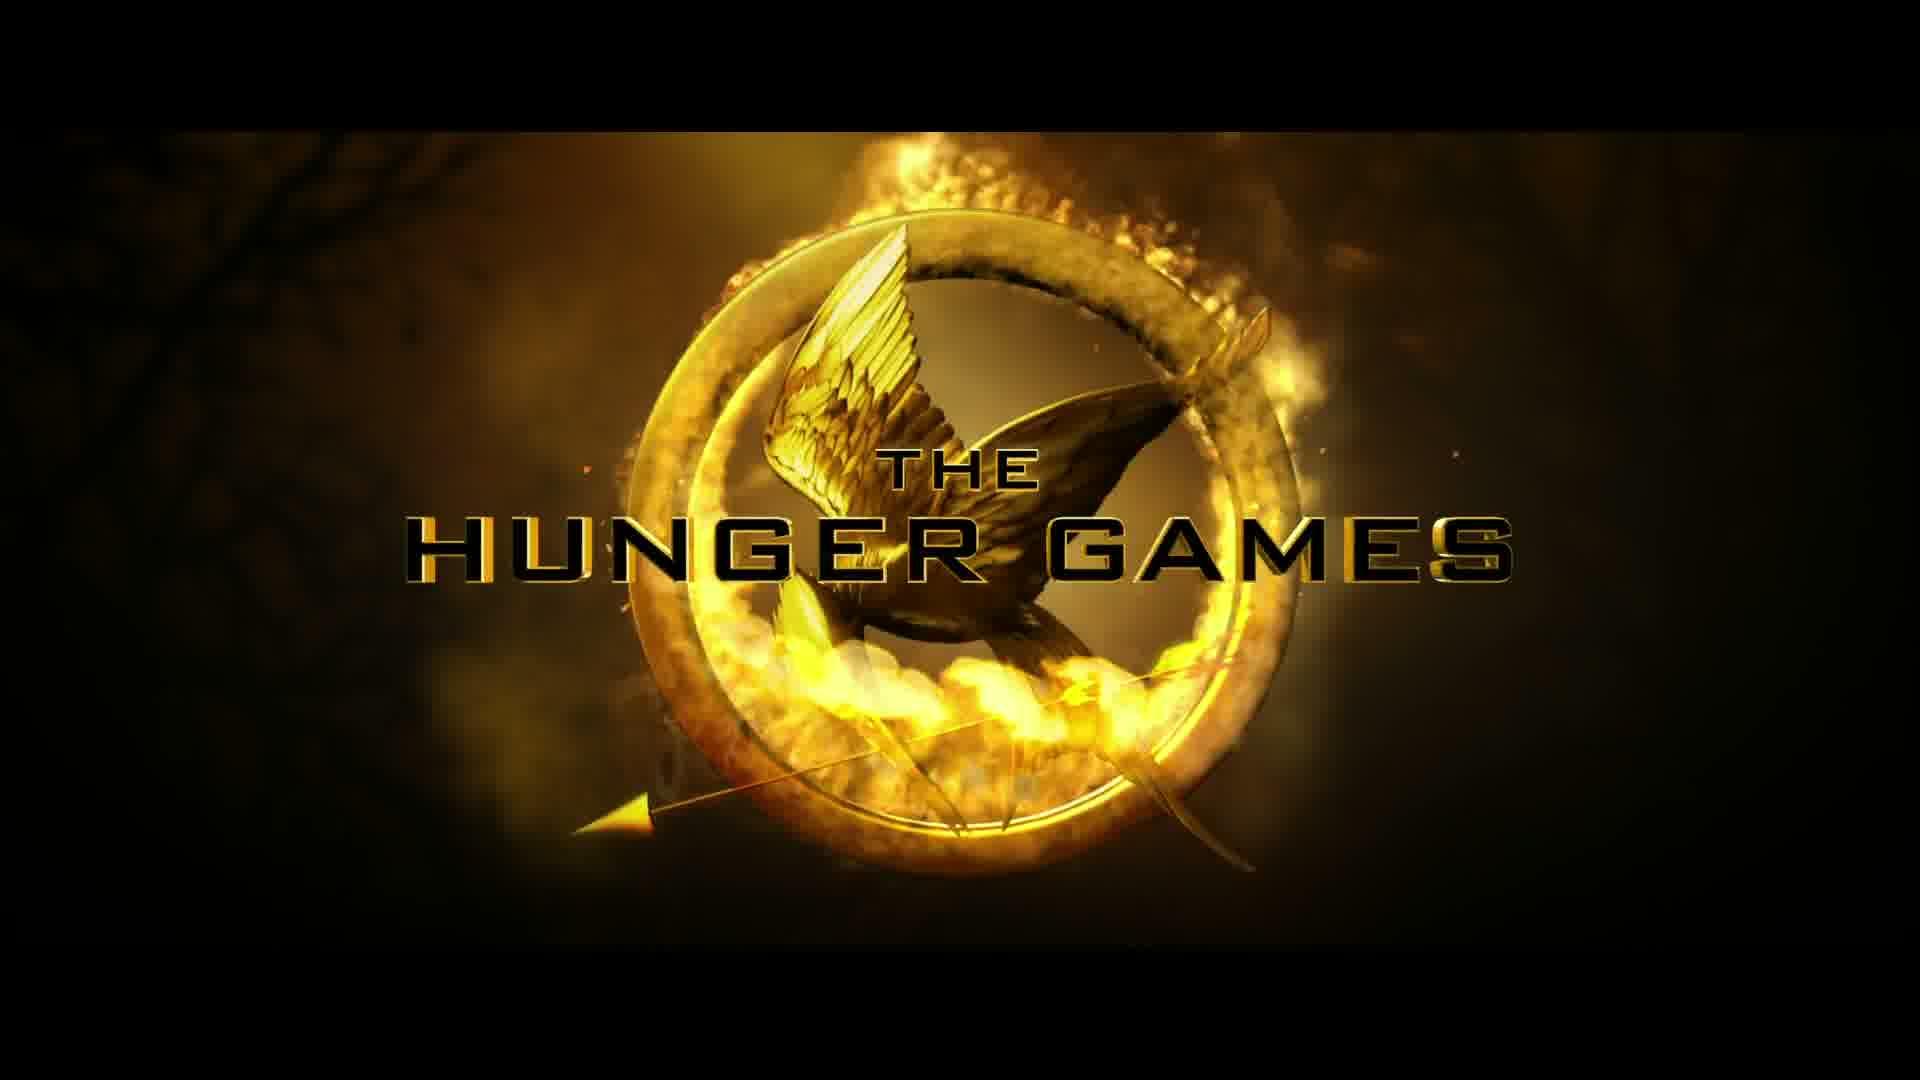 The Hunger Games Wallpaper Download X93B68